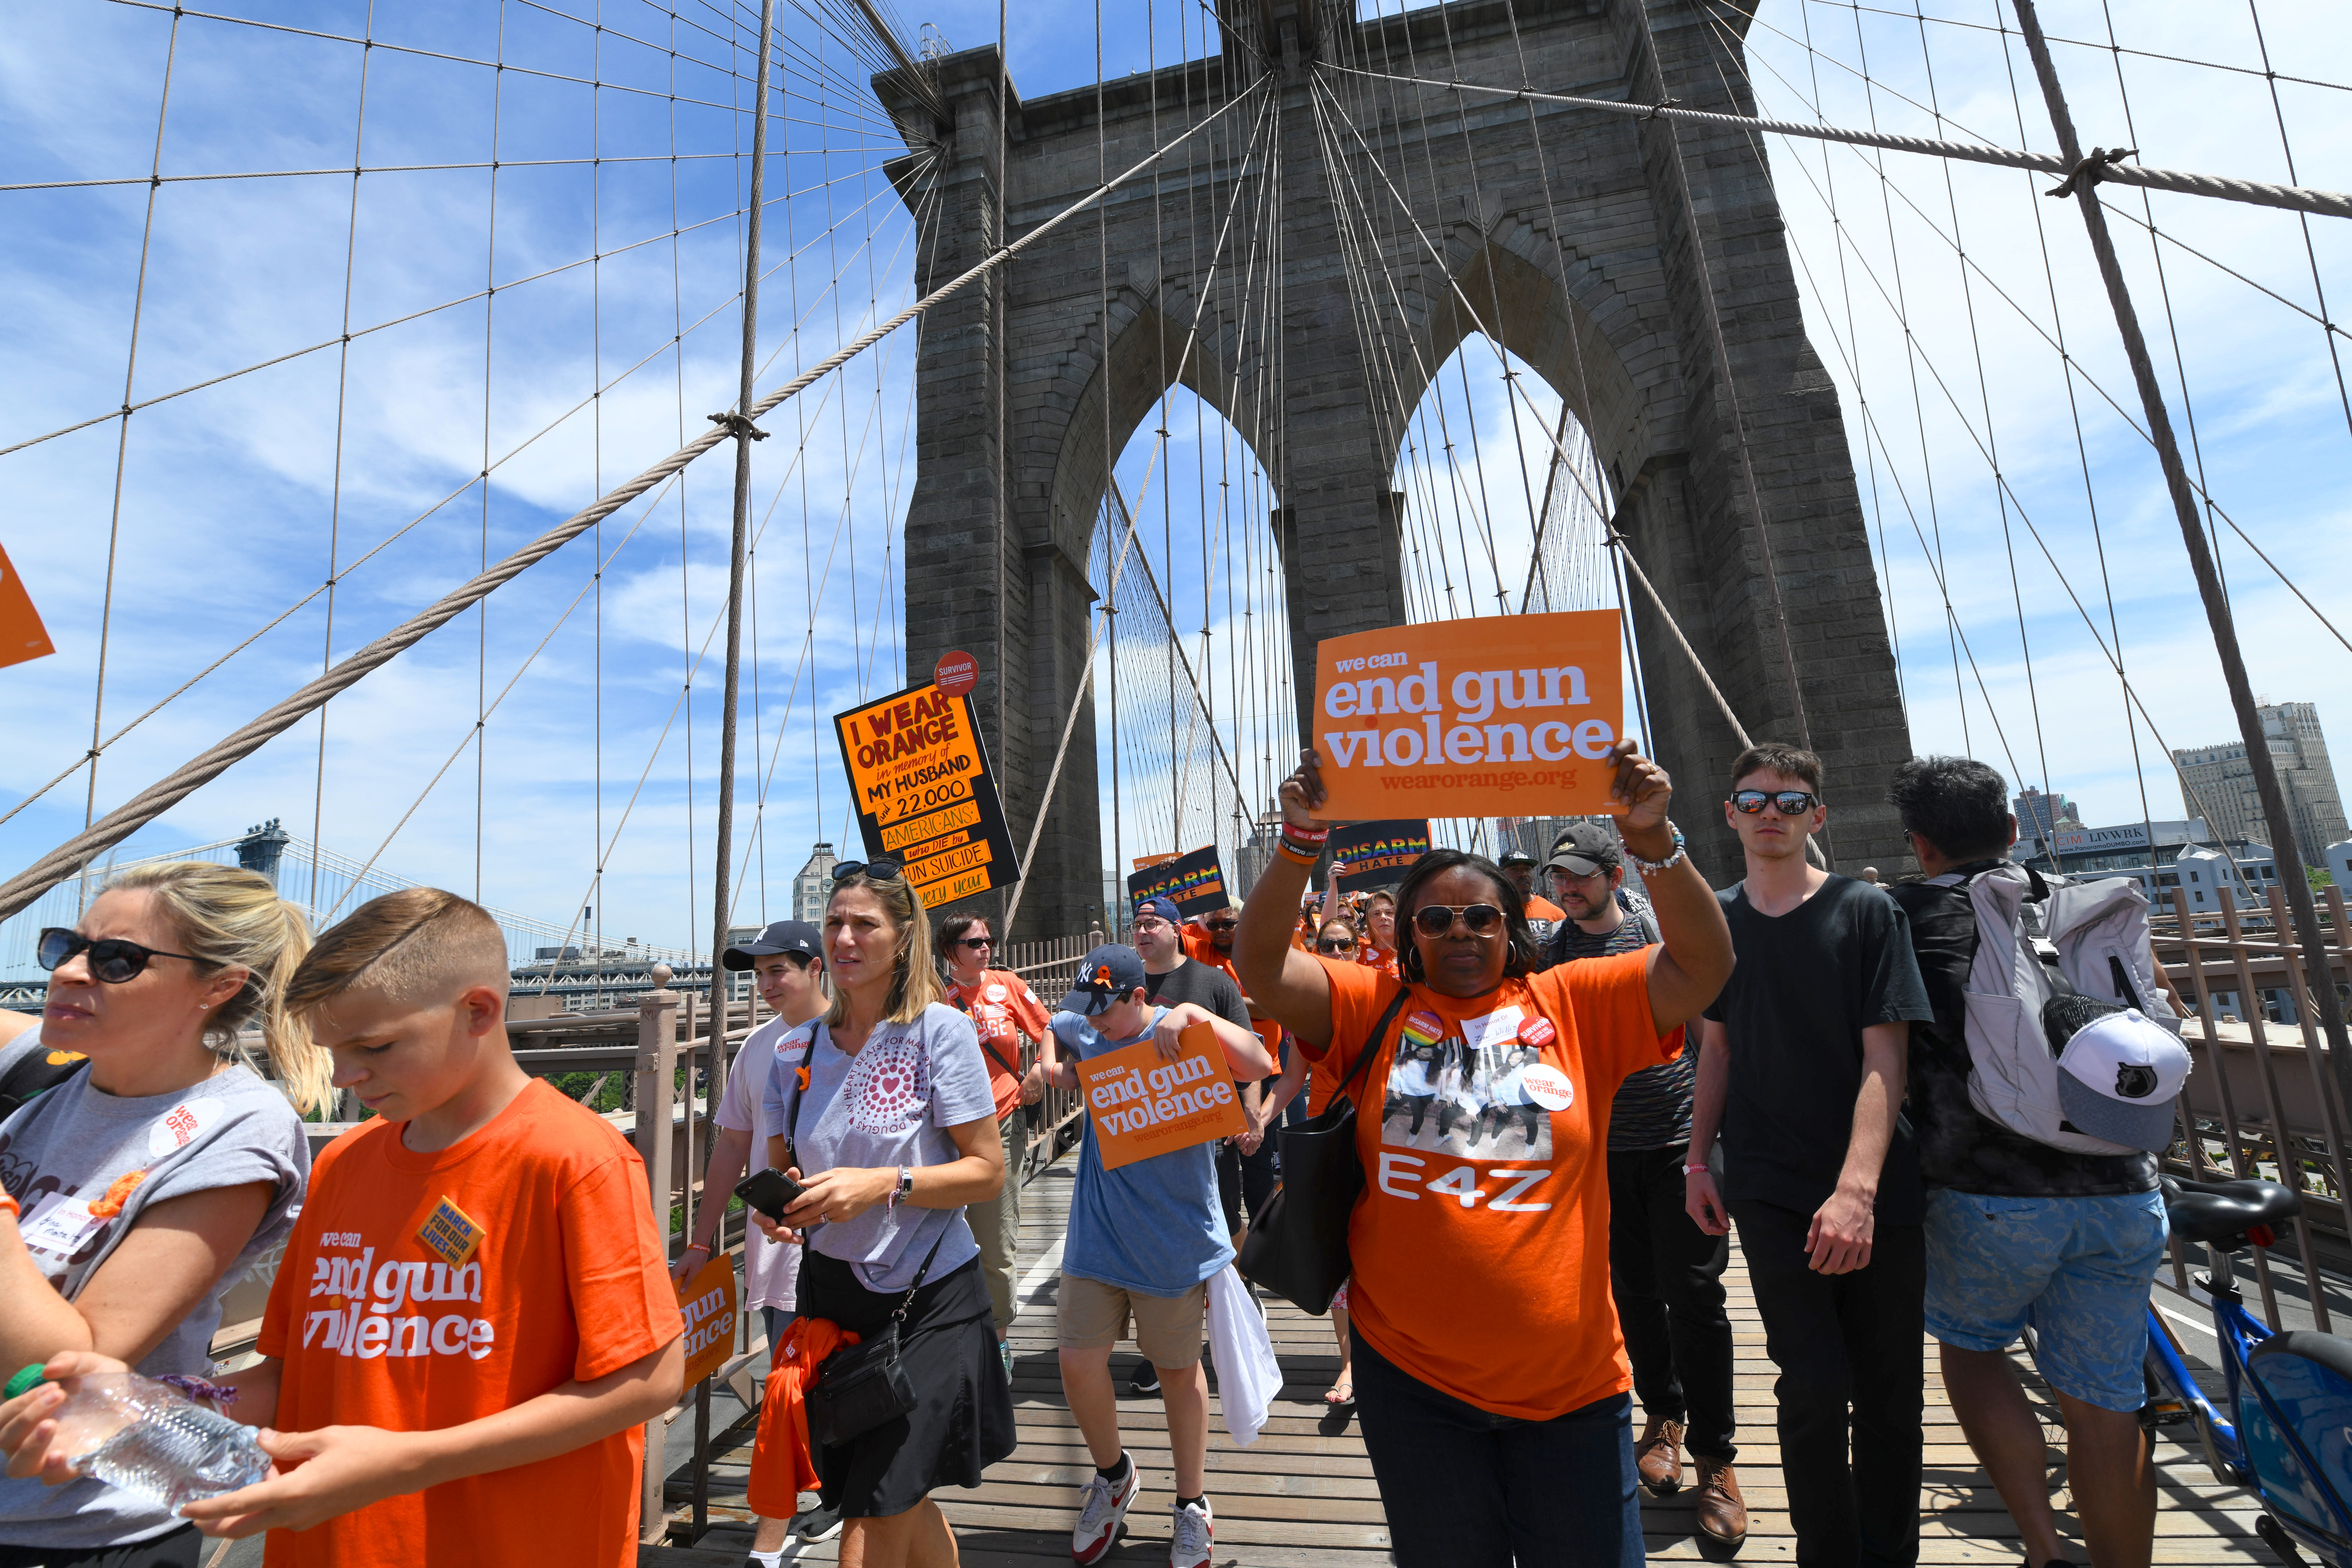 Supporters marched across the Brooklyn Bridge. Eagle photo by Todd Maisel